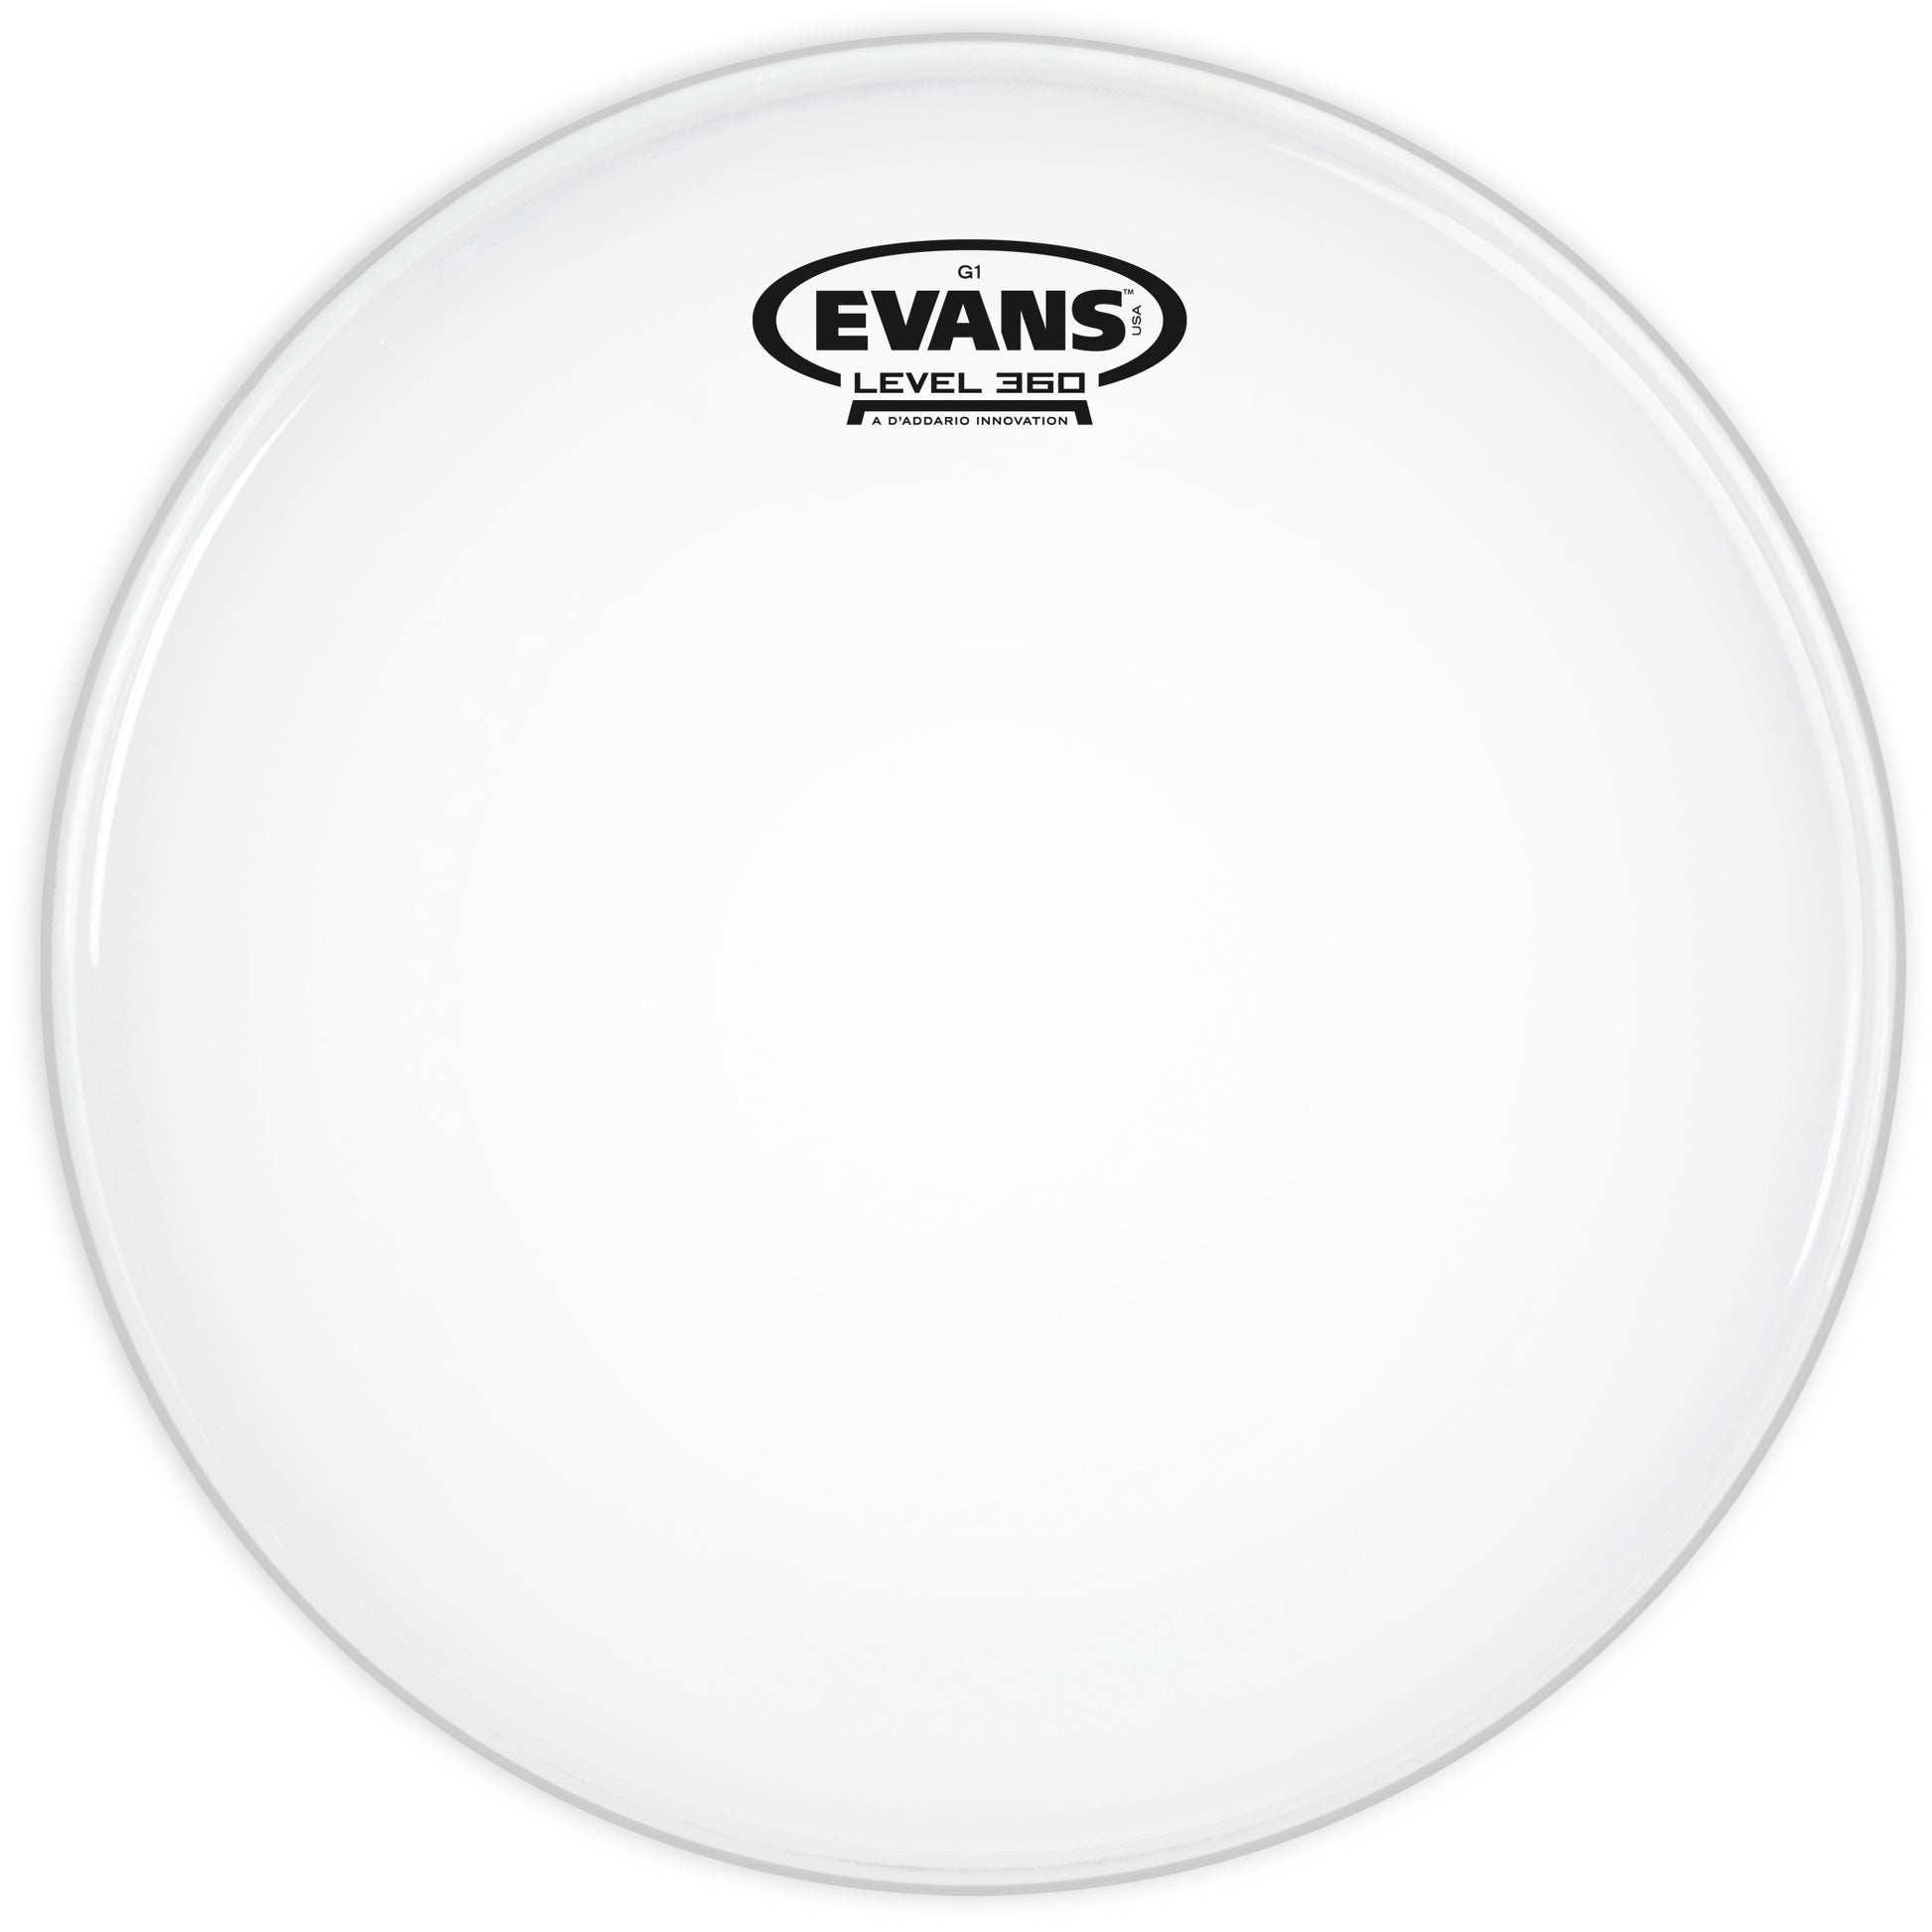 Evans Black Drumhead, Tom Pack: 10, 12, 14, 16 Inch Heads, with 14 Inch G1